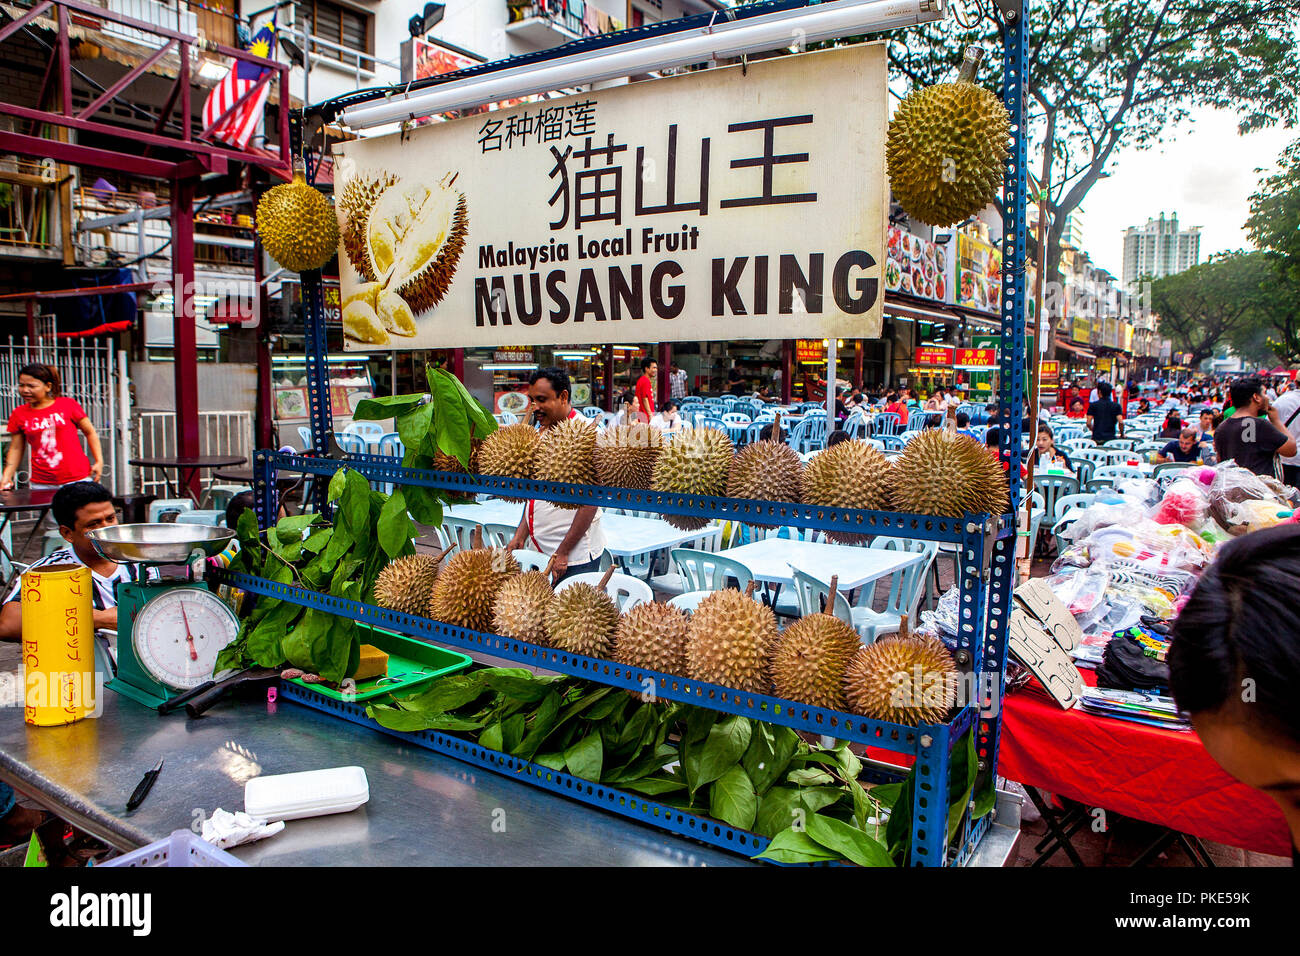 A sign advertises Durian, king of fruits, for sale at a stand on Jalan Alor, Food Street, in Kuala Lumpur, Malaysia. Stock Photo